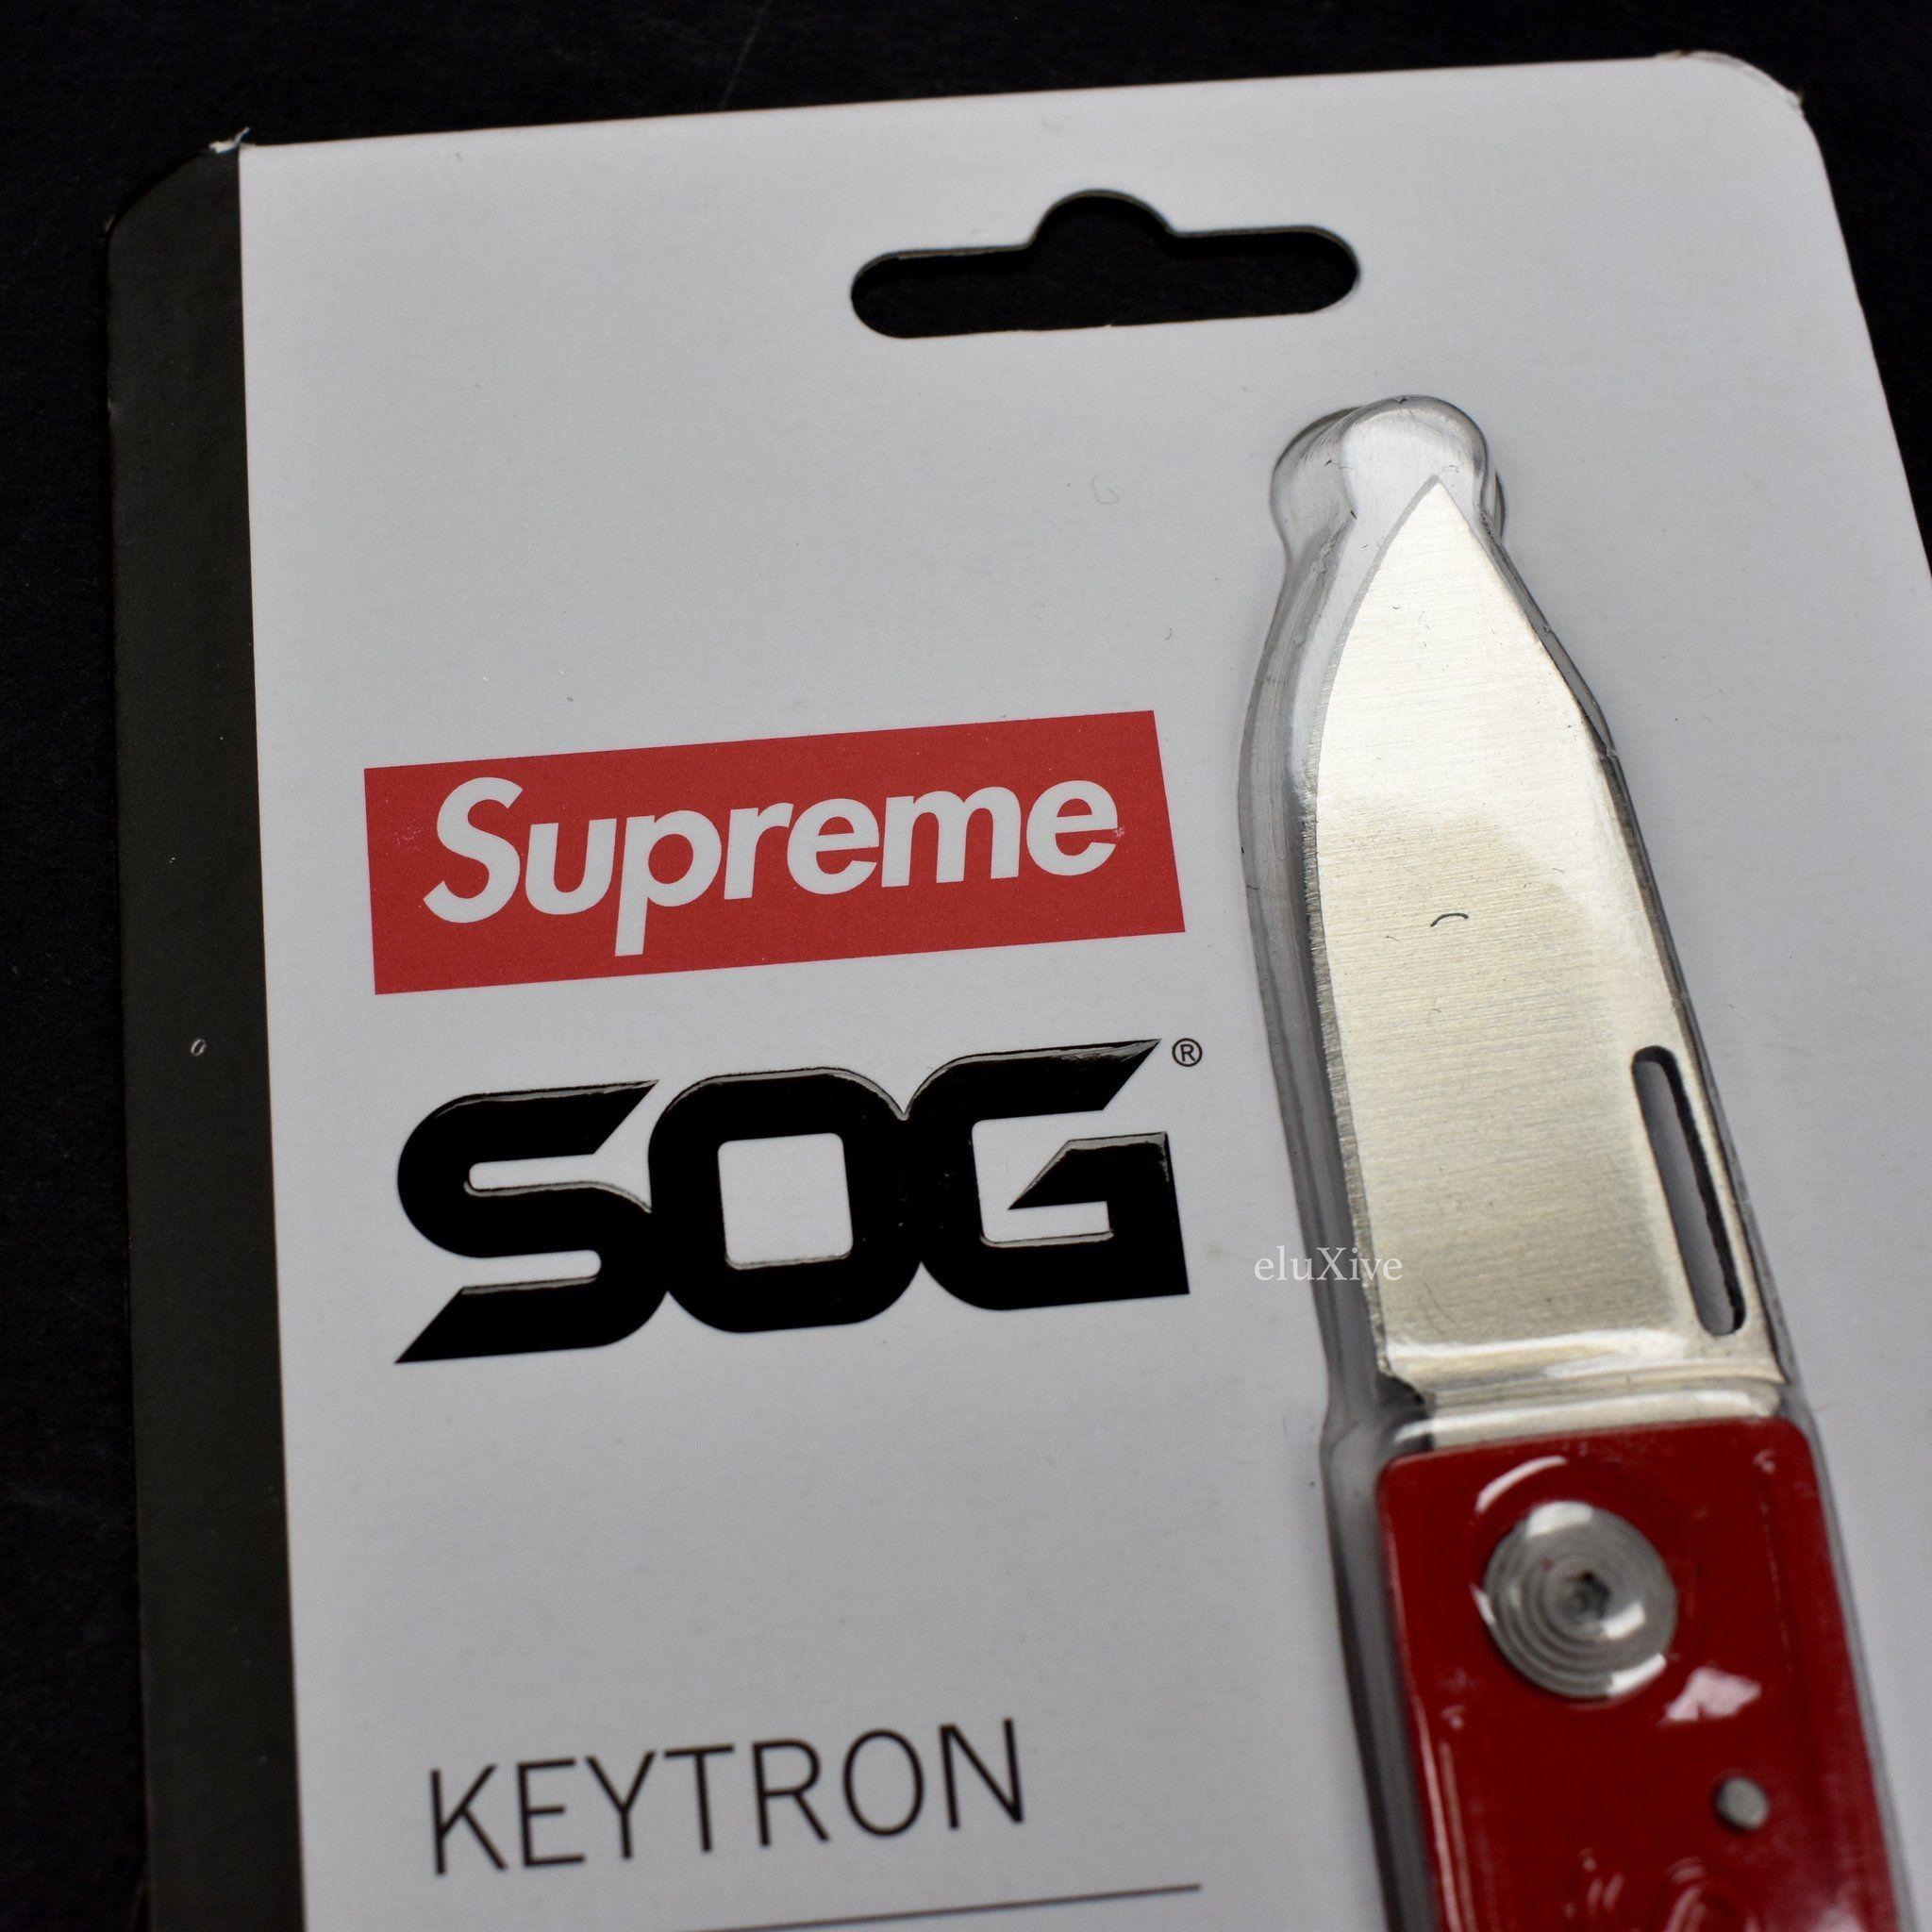 Office Red Box Logo - Supreme x Statgear - Red Box Logo Stainless Steel Knife Keychain ...